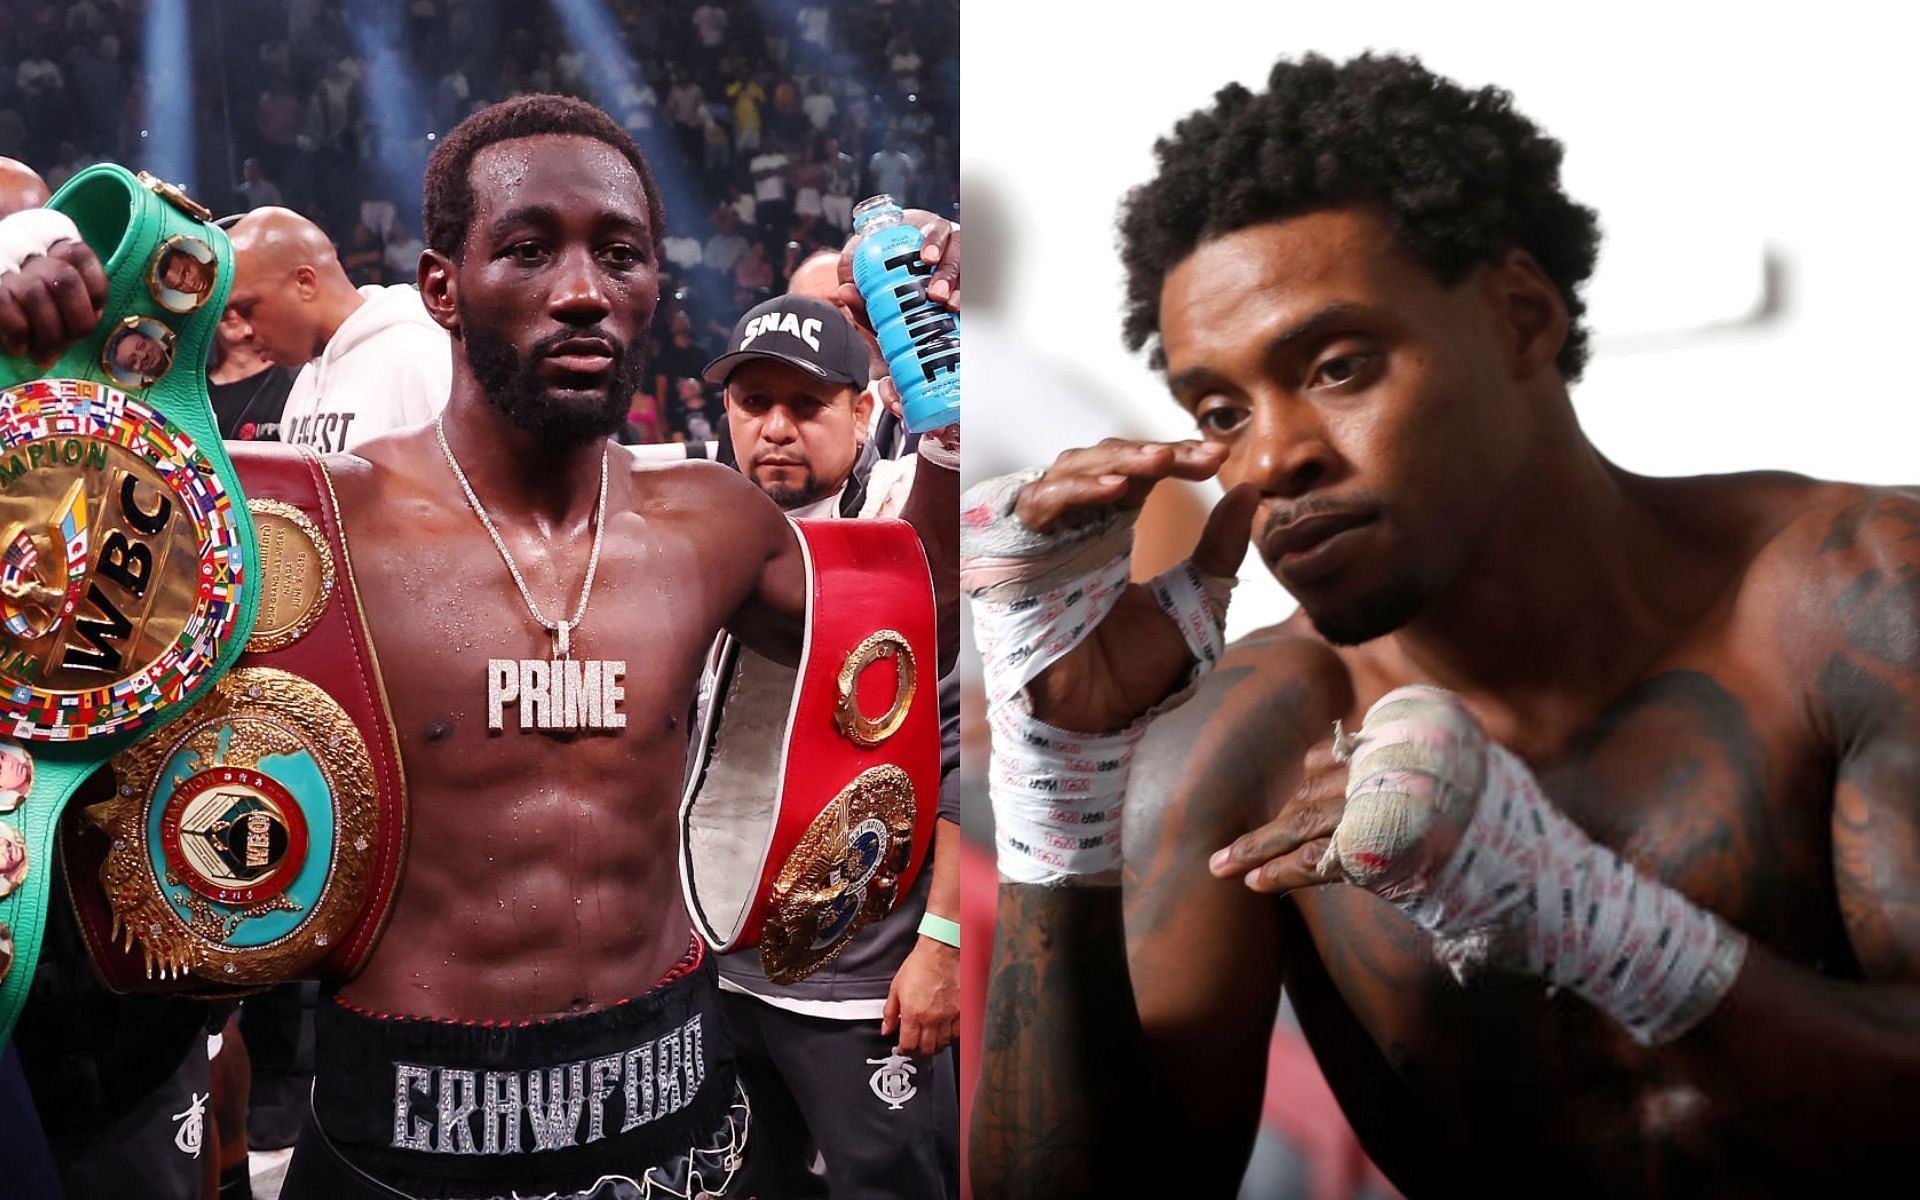 Terence Crawford (left) and Errol Spence Jr. (right) [Images Courtesy: @GettyImages]